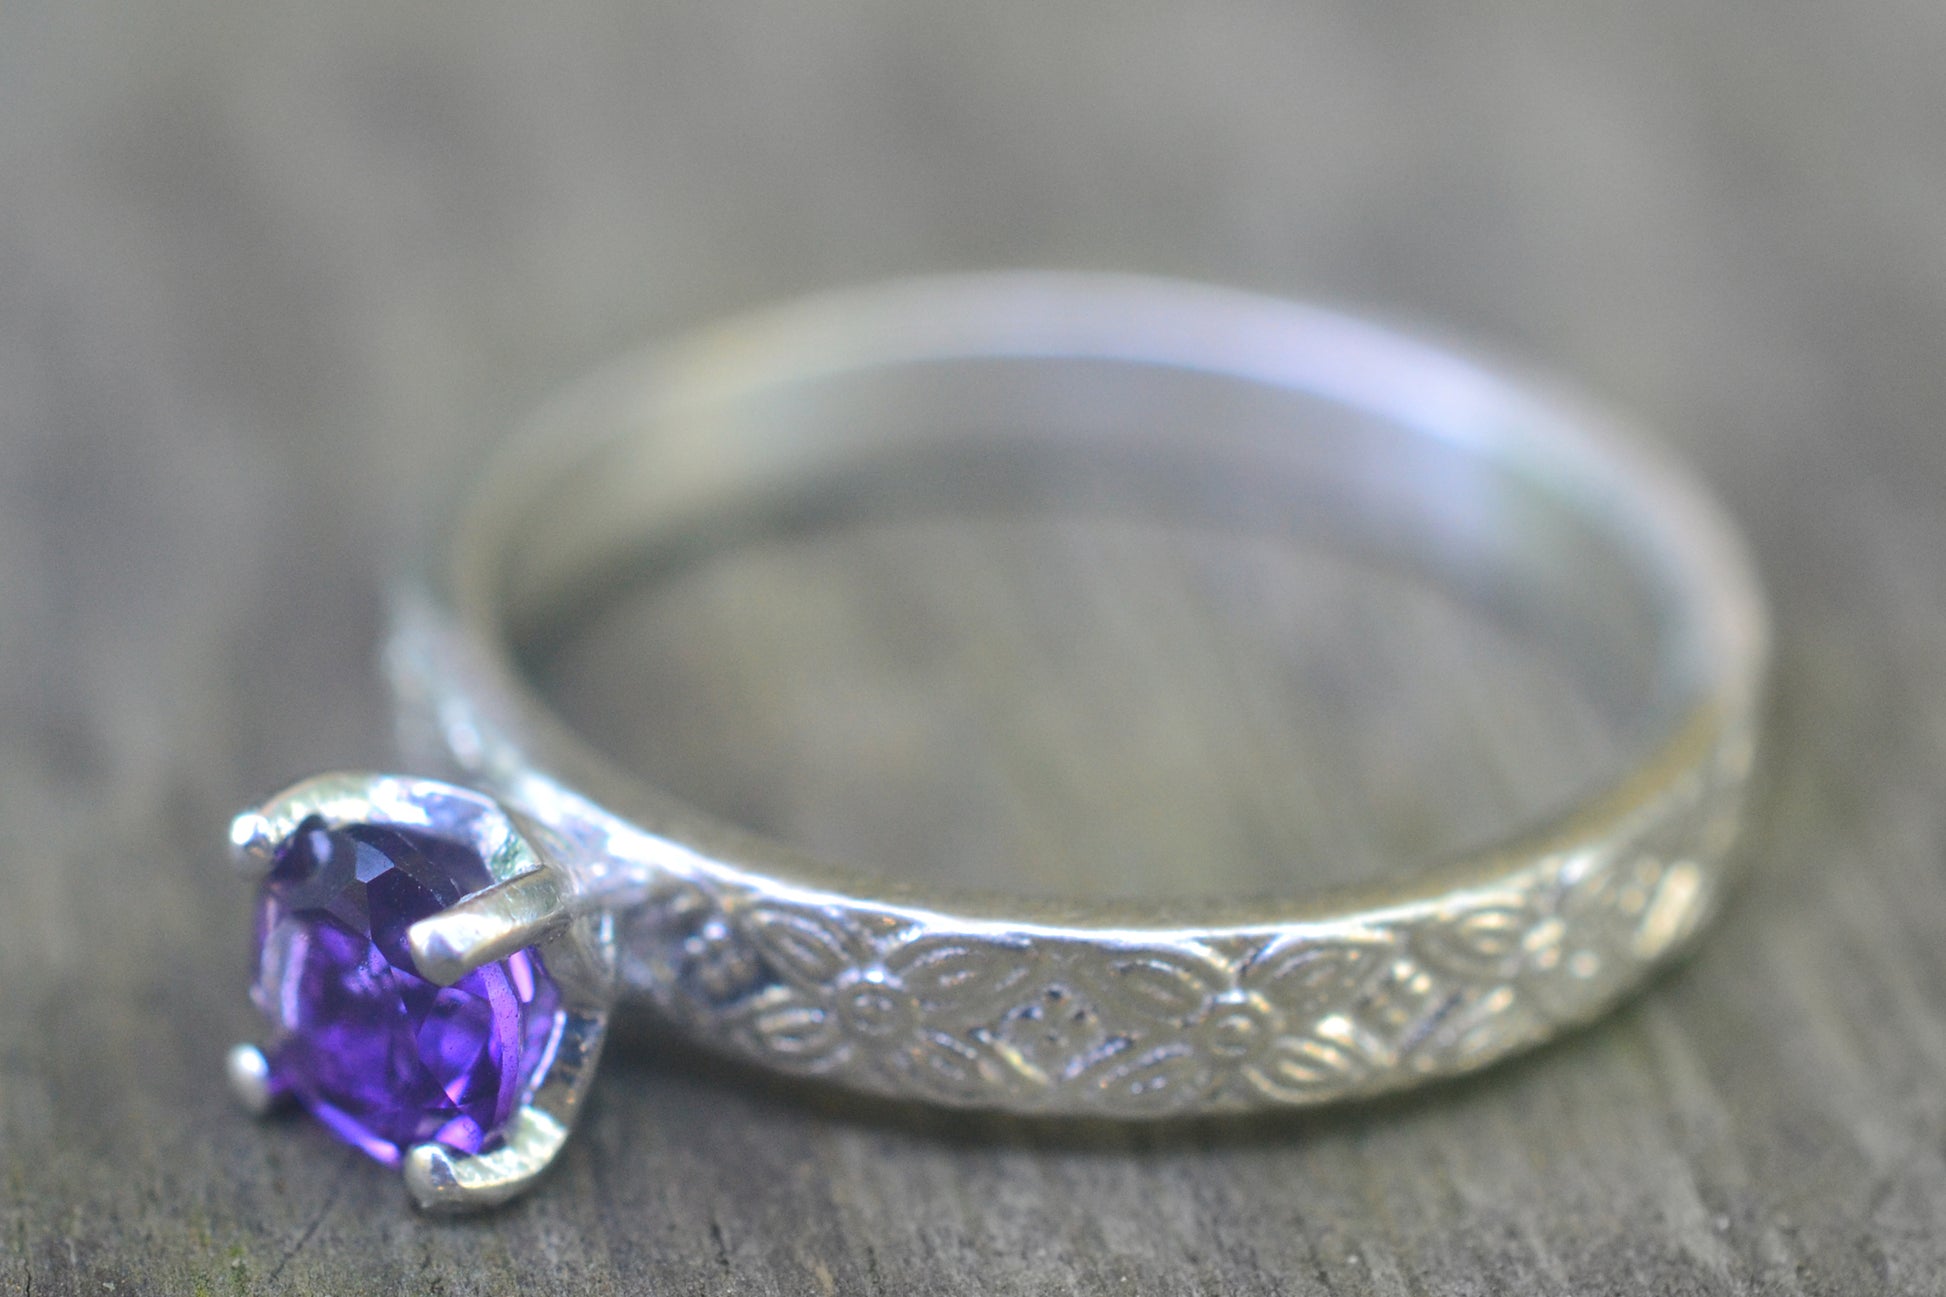 5mm Amethyst Solitaire Ring With Poesy Band